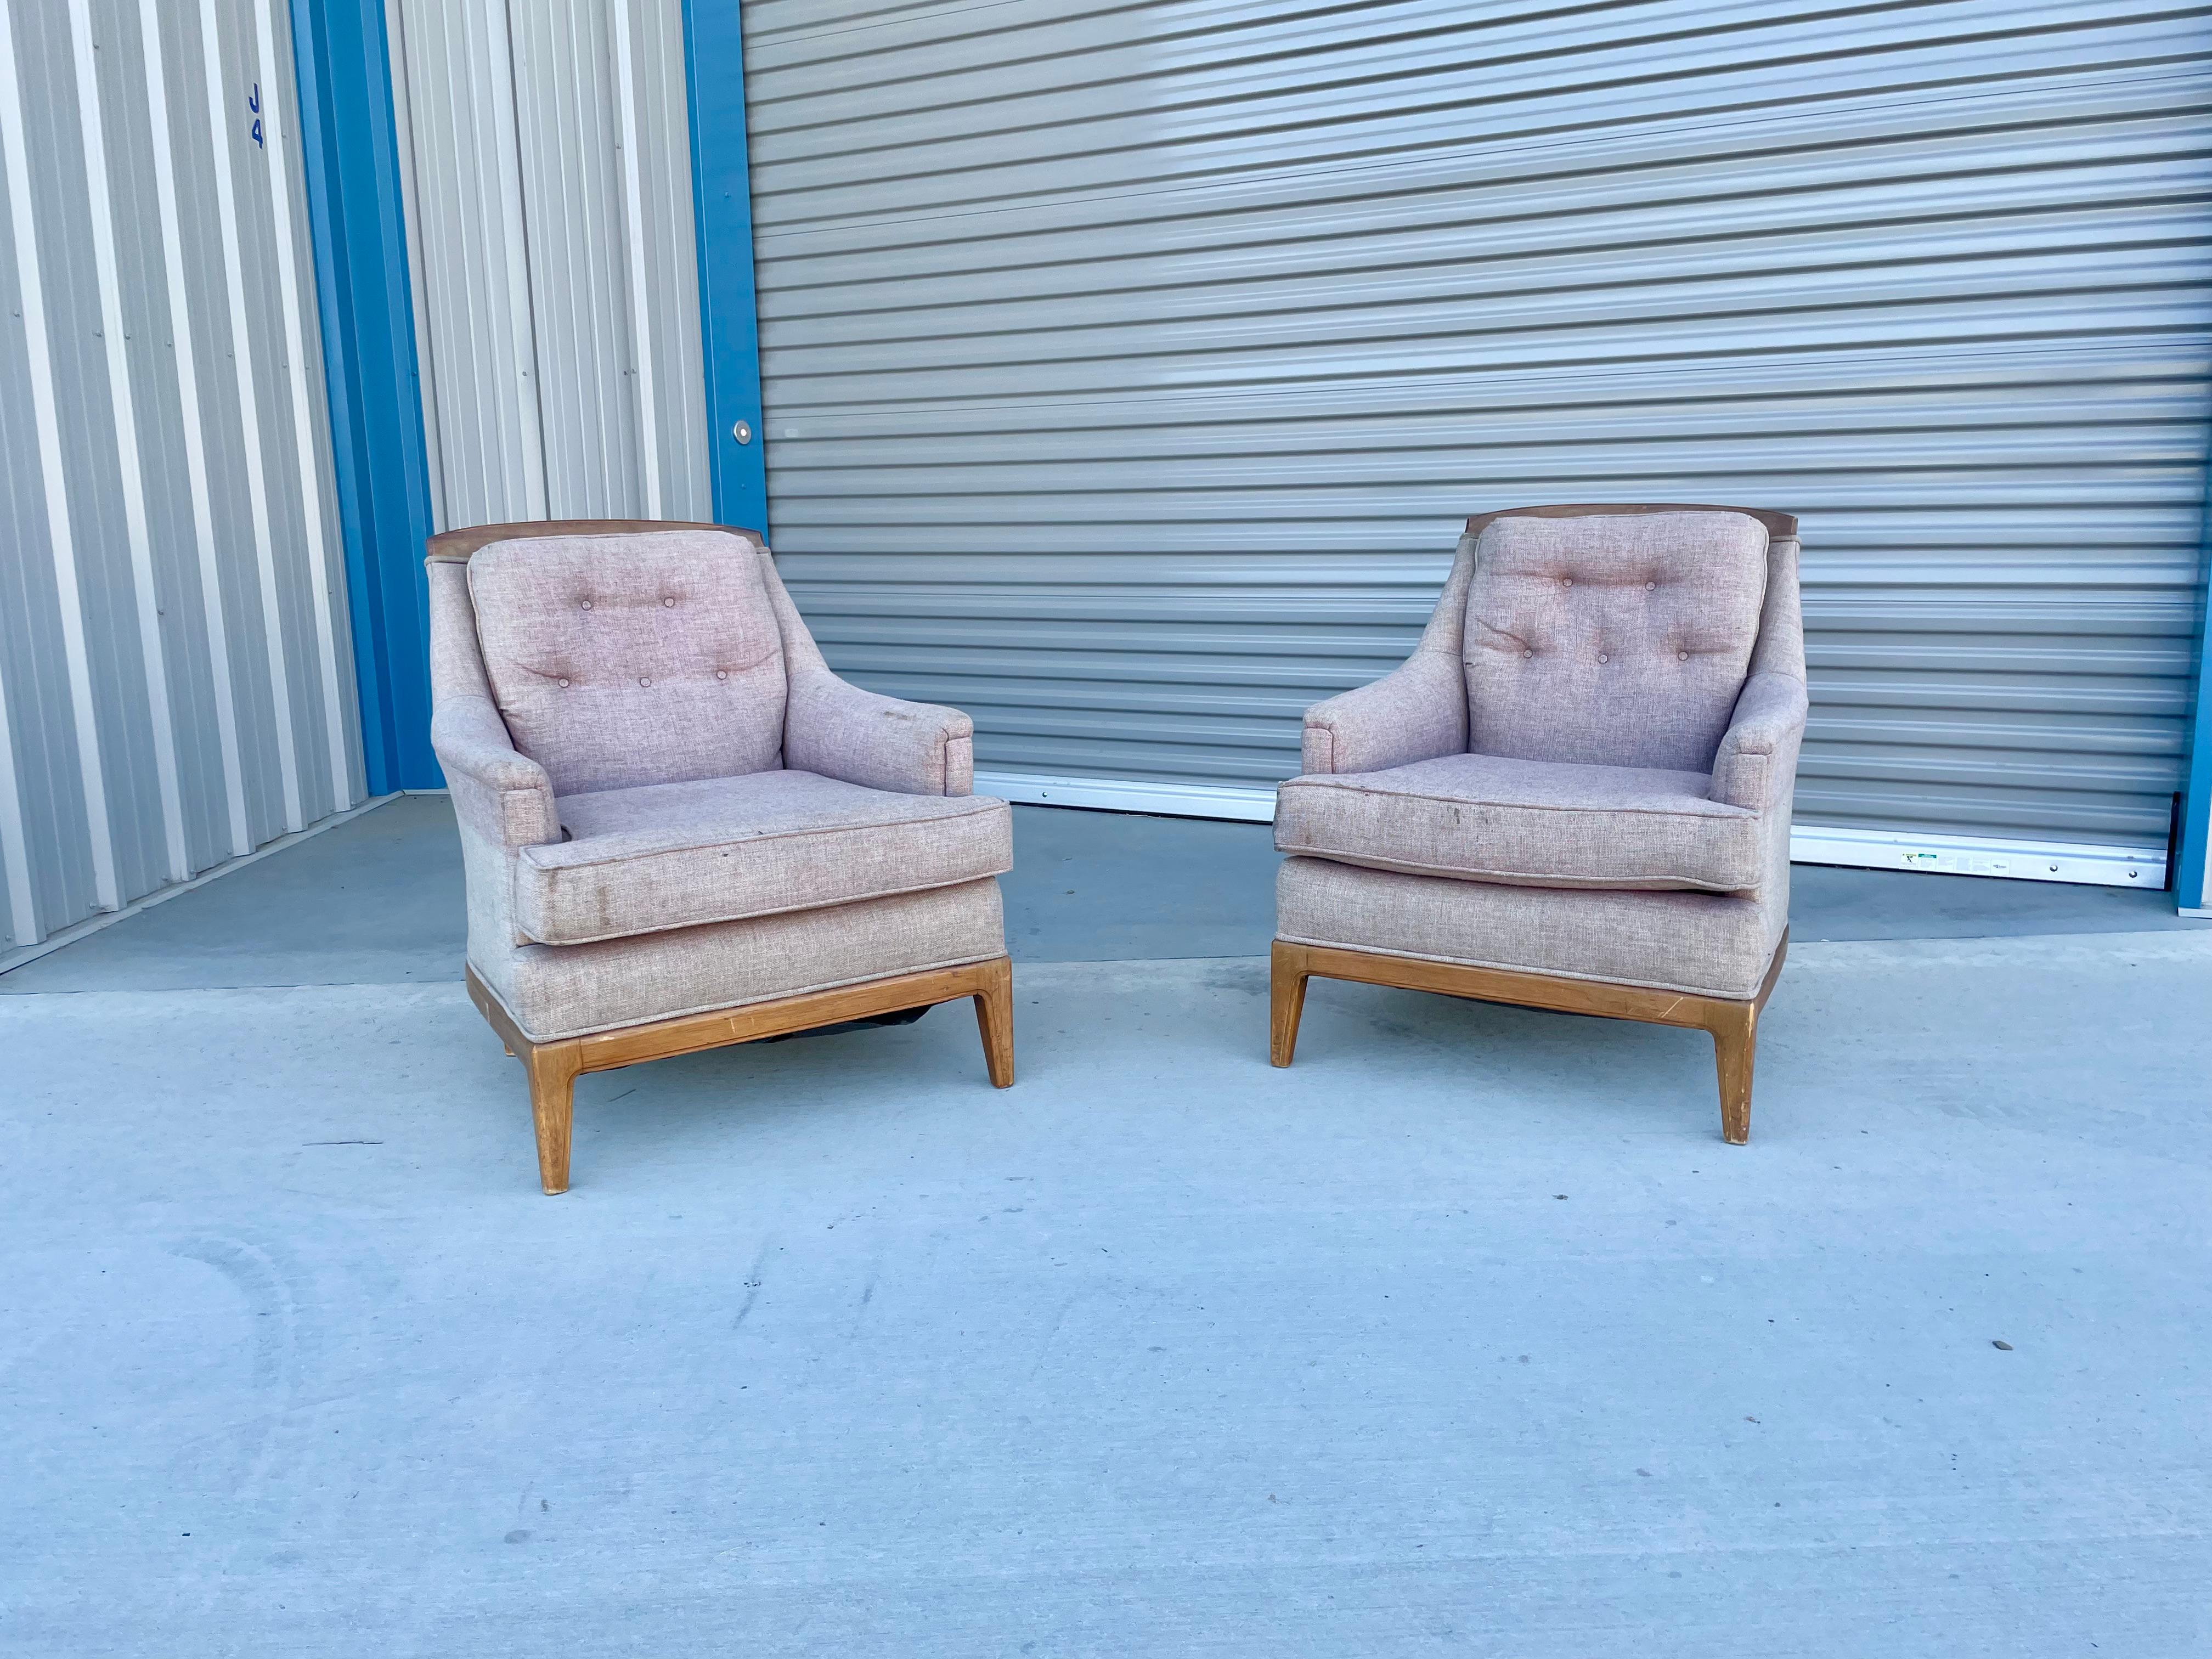 Vintage walnut lounge chairs were designed and manufactured in the united states circa 1960s. This pair of chairs features its original upholstery that needs to be reupholstered, but perfect opportunity to create your ideal design that fits your